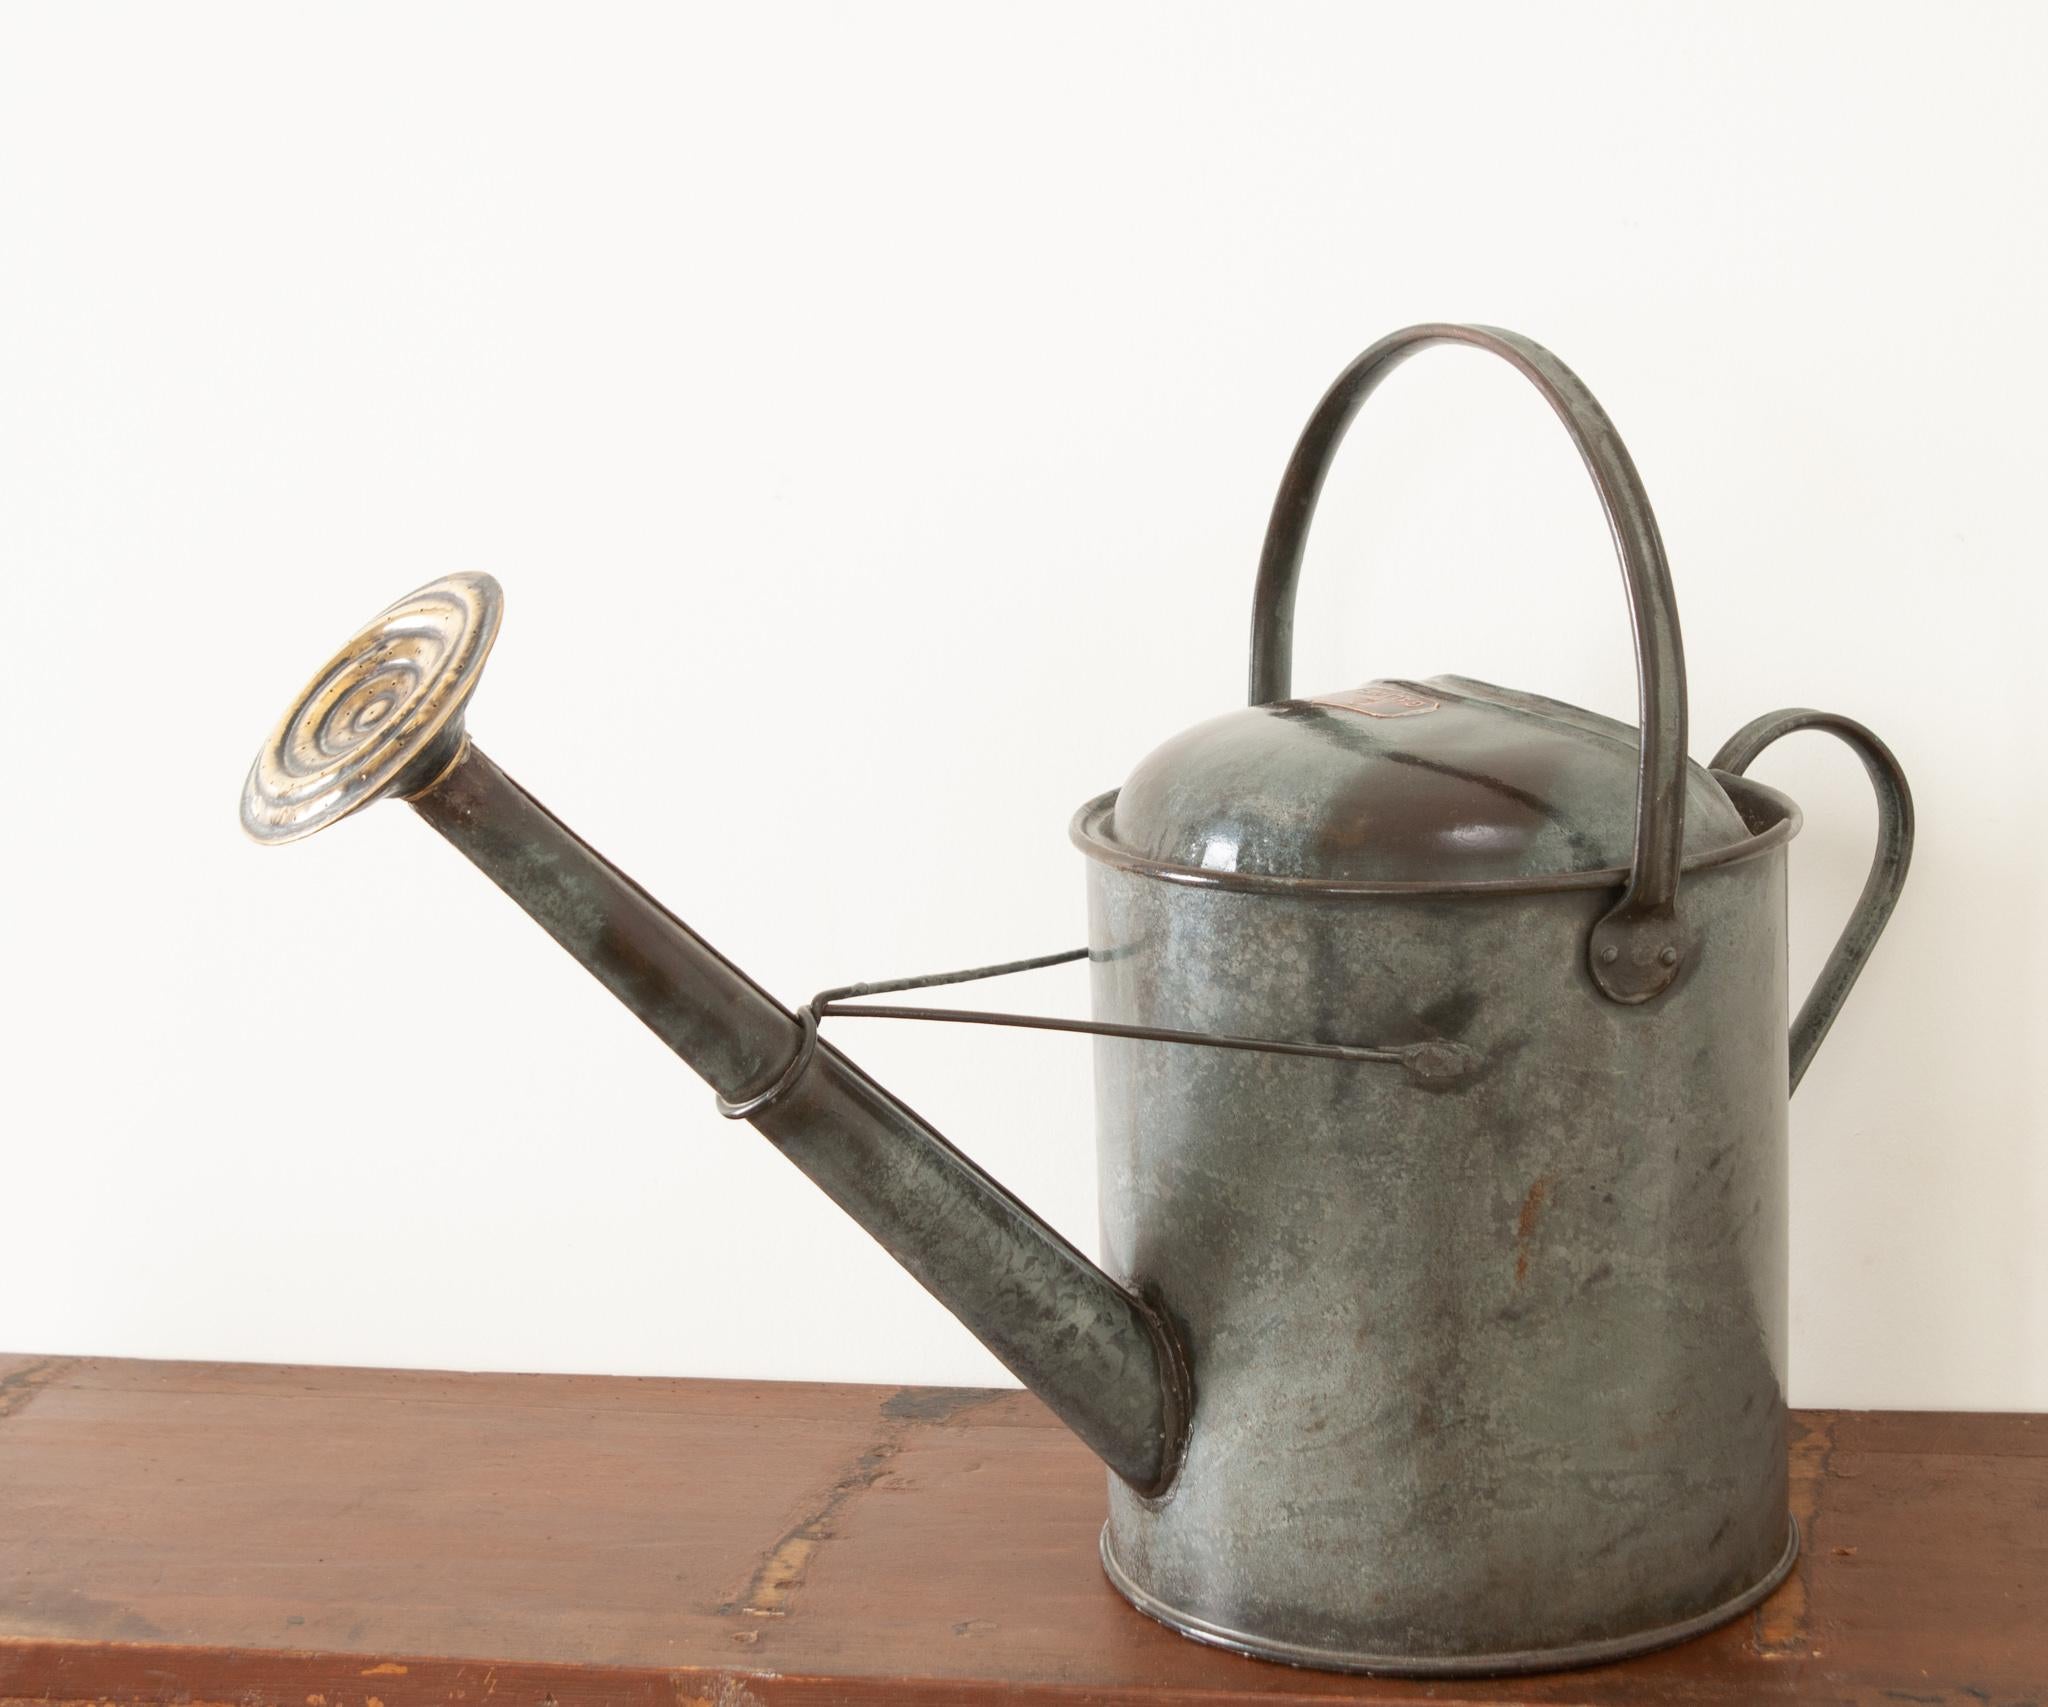 This whimsical English garden antique is just as functional as it is decorative. Crafted from zinc with accents of brass- the whole has gained a great patina. Double handles; one for carrying, the other for pouring- make it convenient to use daily.